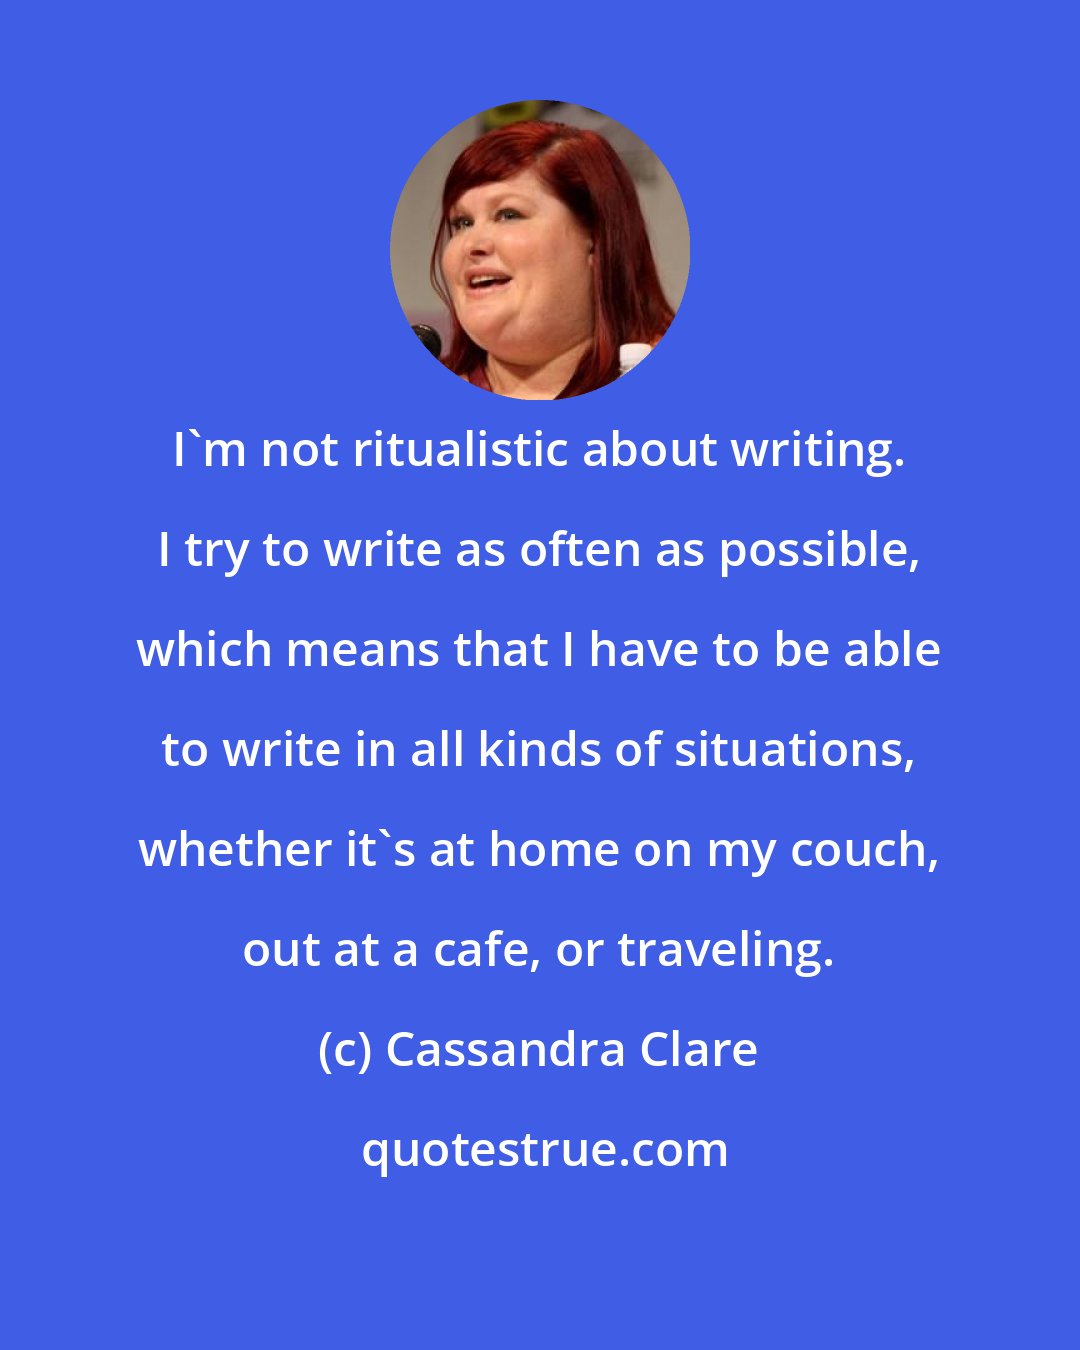 Cassandra Clare: I'm not ritualistic about writing. I try to write as often as possible, which means that I have to be able to write in all kinds of situations, whether it's at home on my couch, out at a cafe, or traveling.